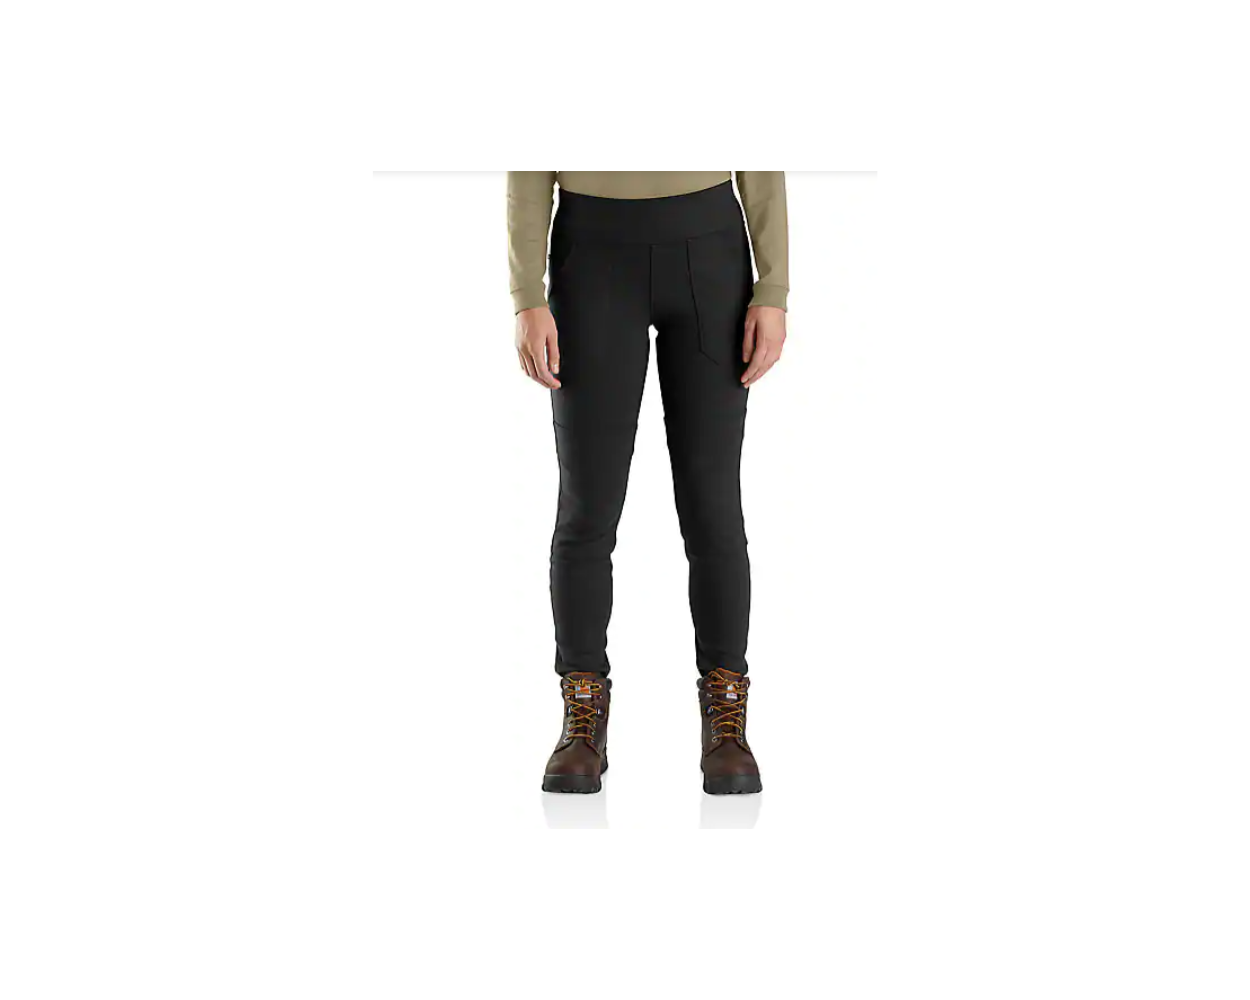 Carhartt Women's Force Fitted Heavyweight Lined Legging, Black